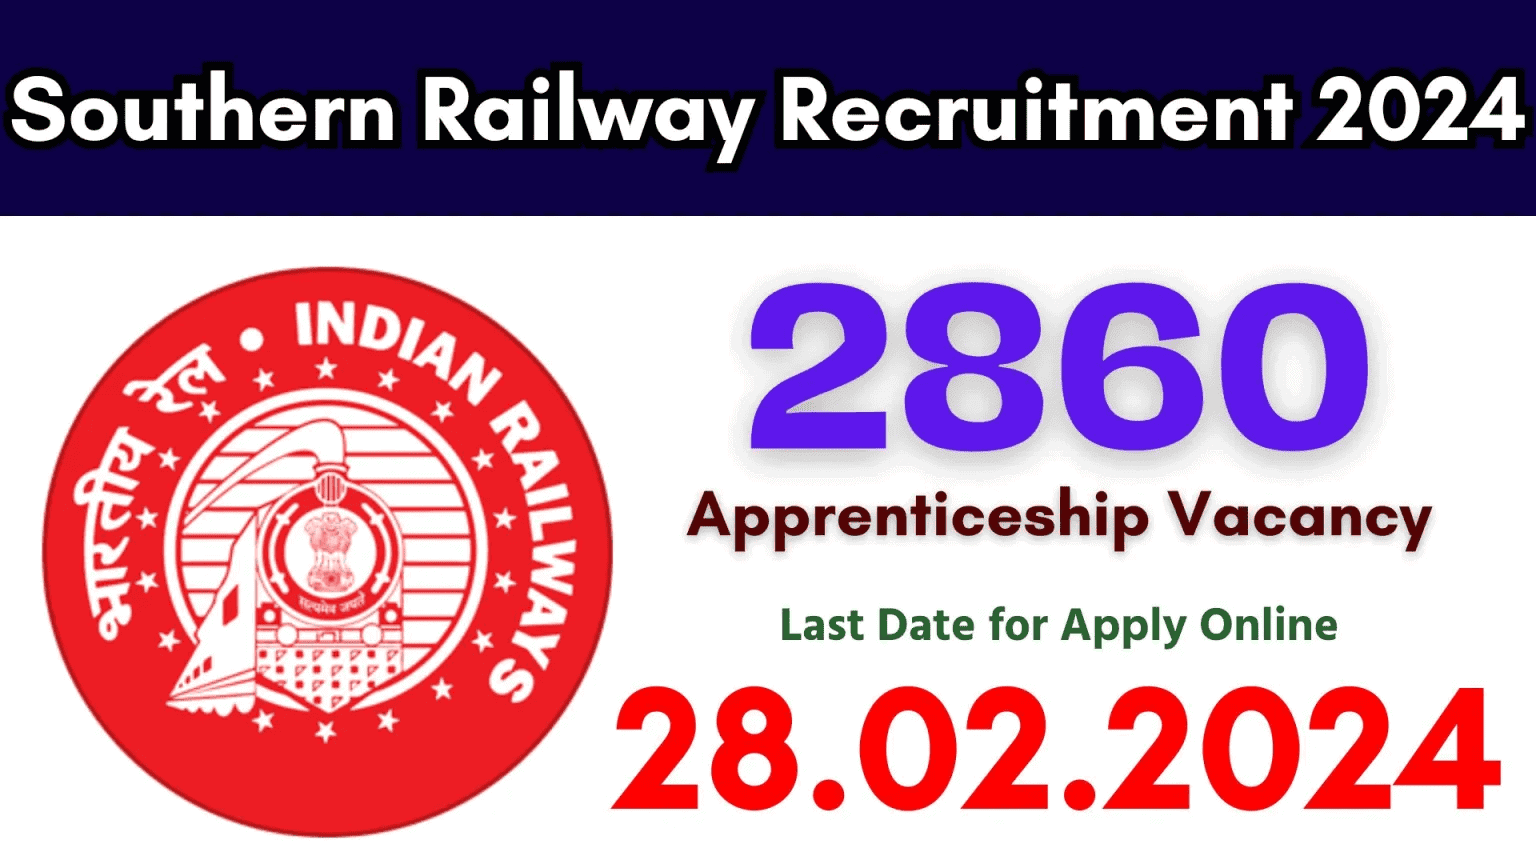 C:\Users\USER\Downloads\Southern-Railway-Apprentice-2024-1.png